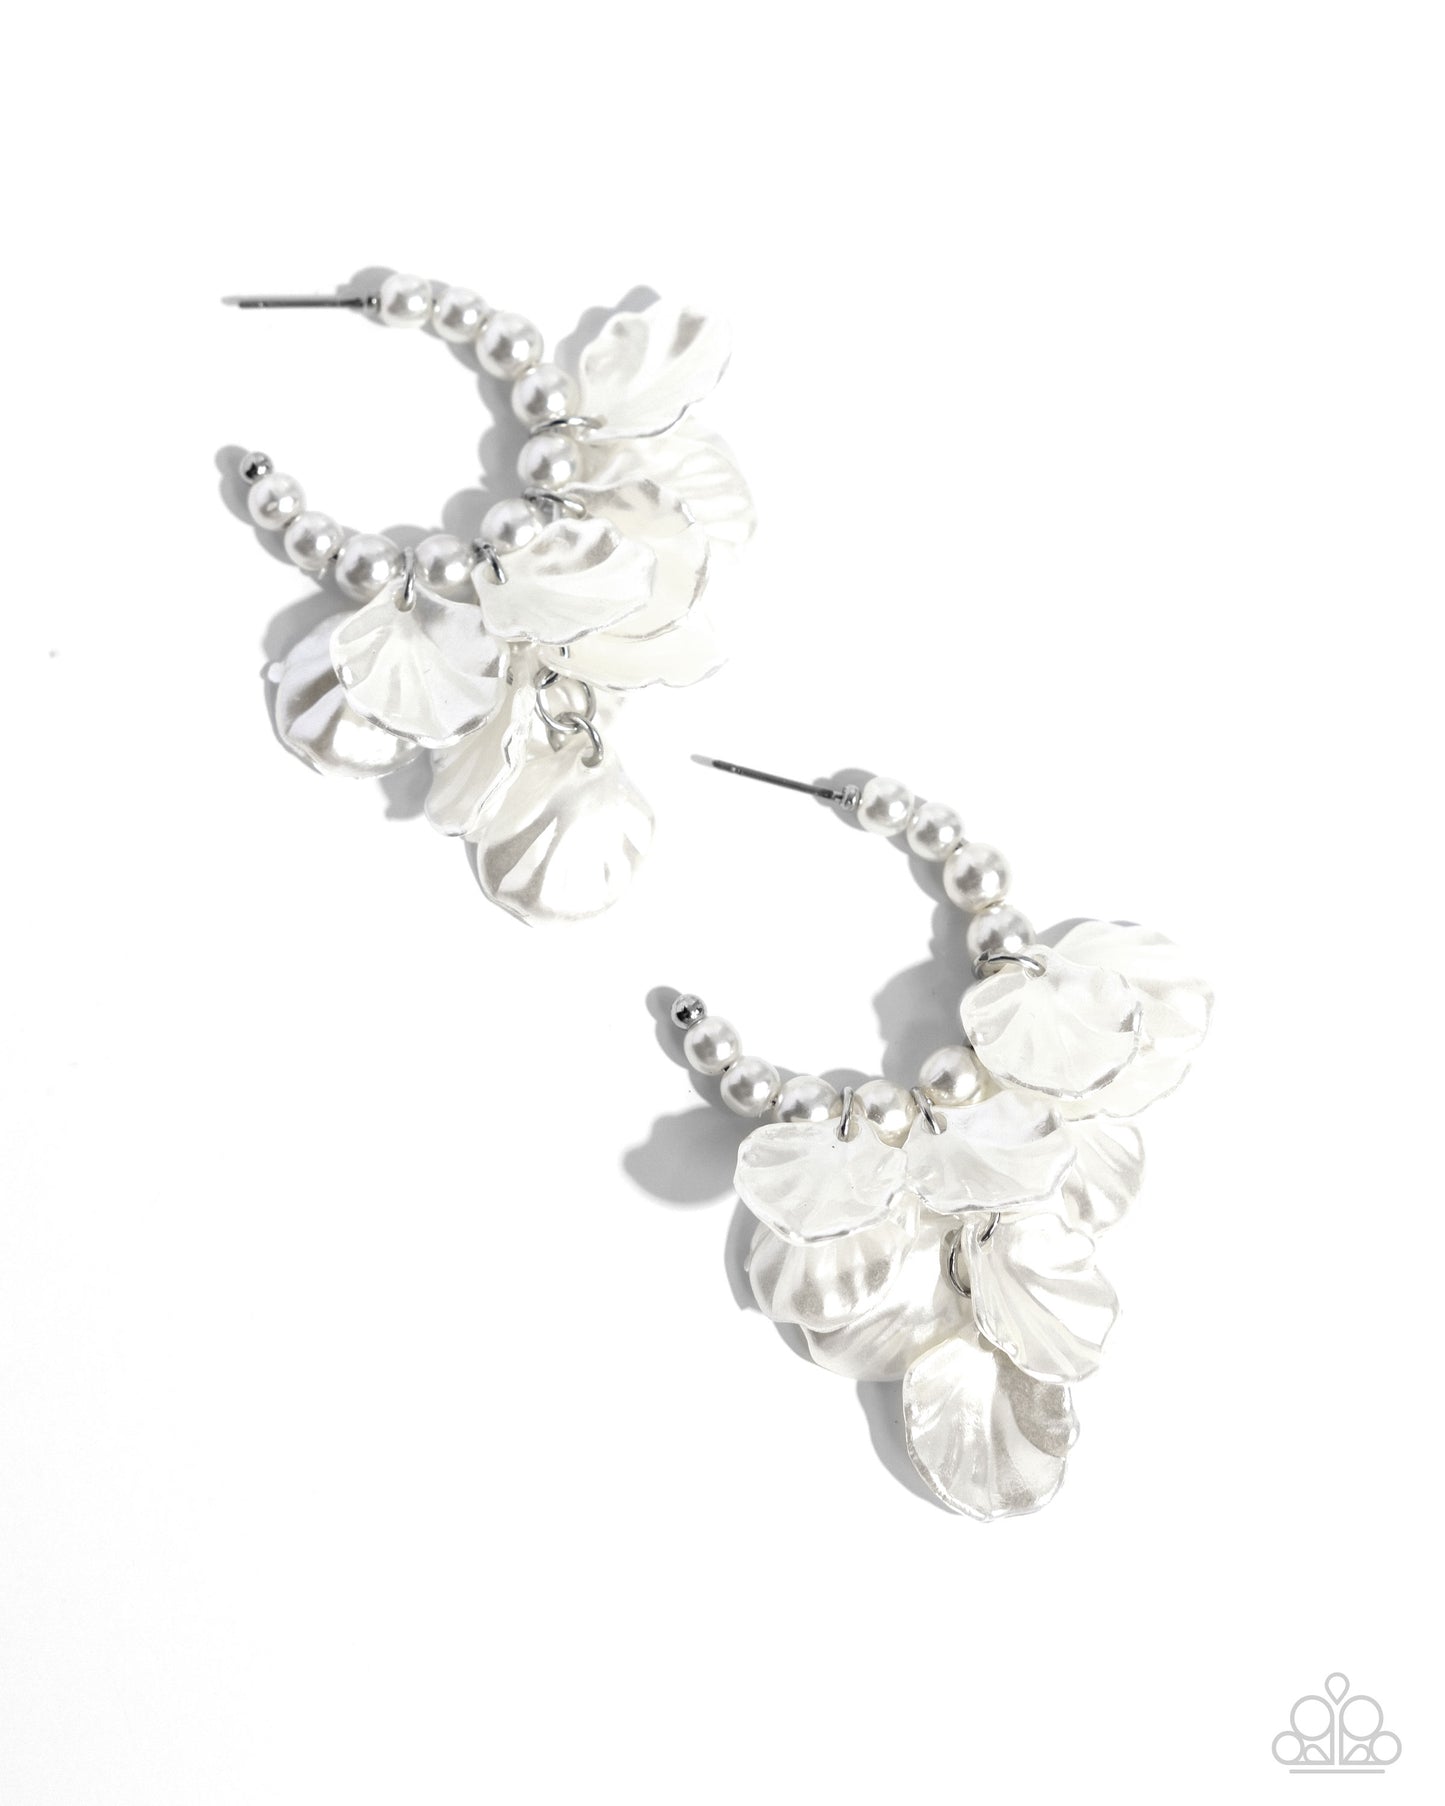 Frilly Feature White-Earrings